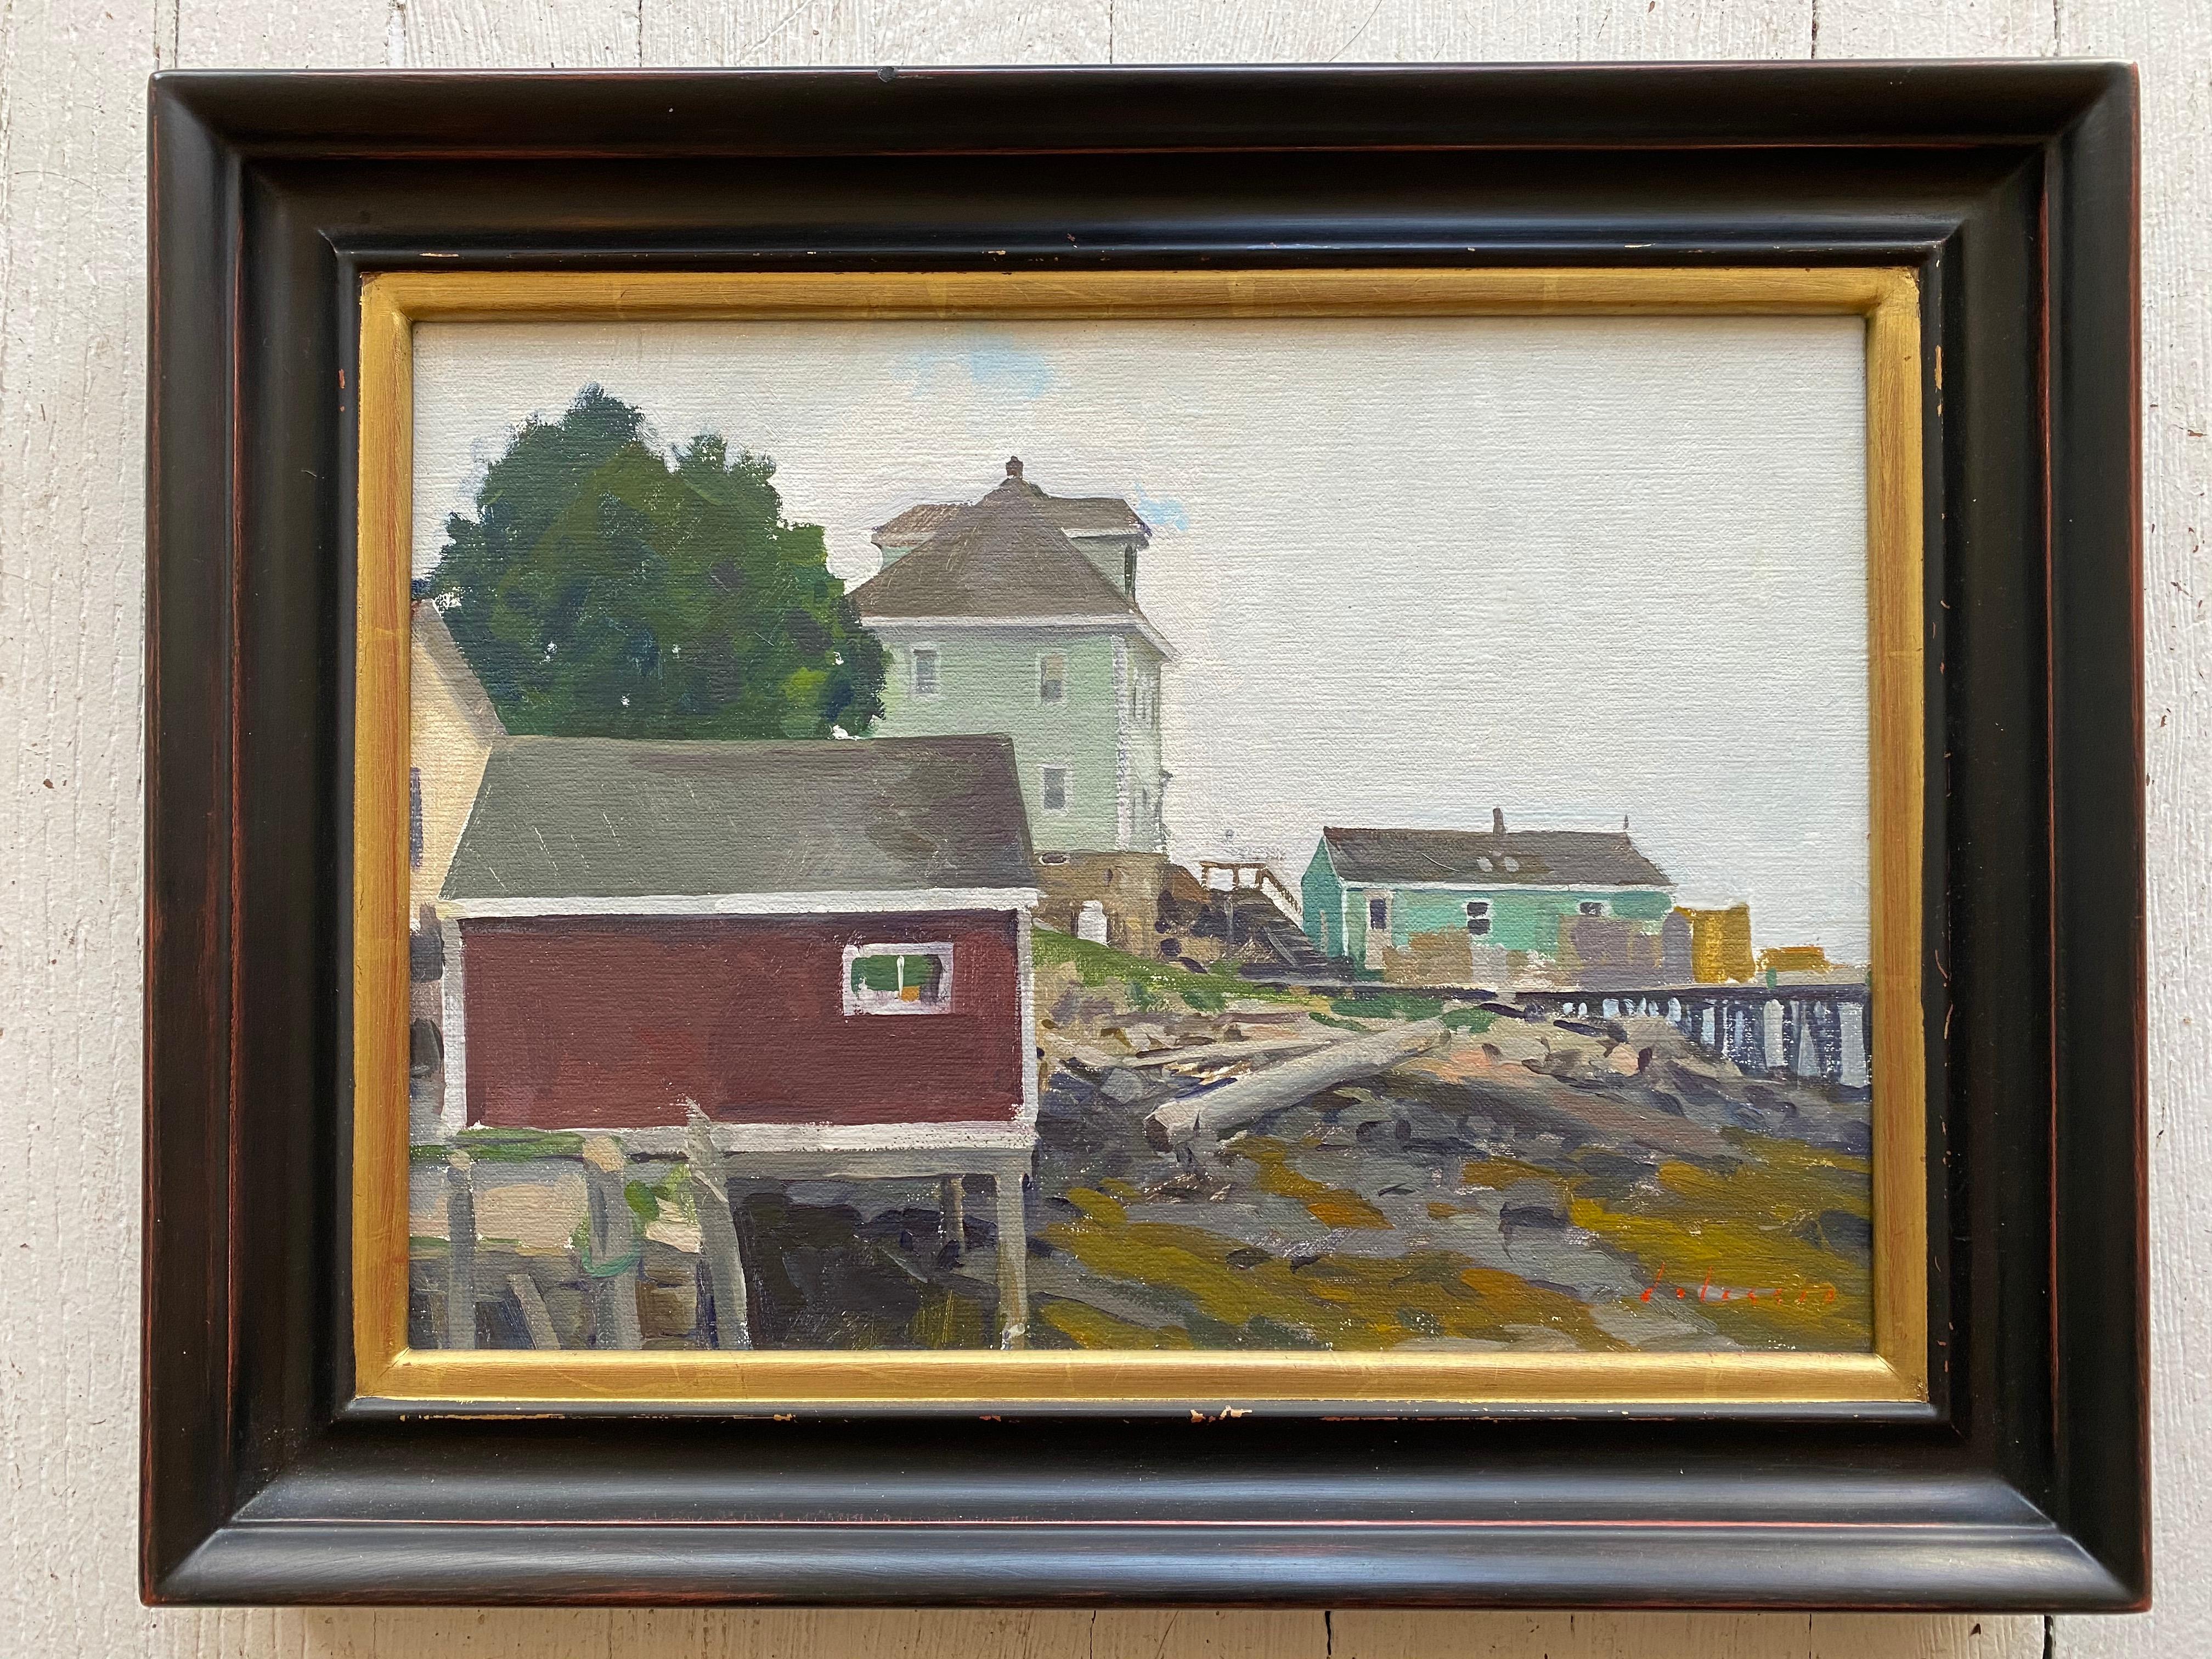 Grey Day, Stonington - Painting by Marc Dalessio